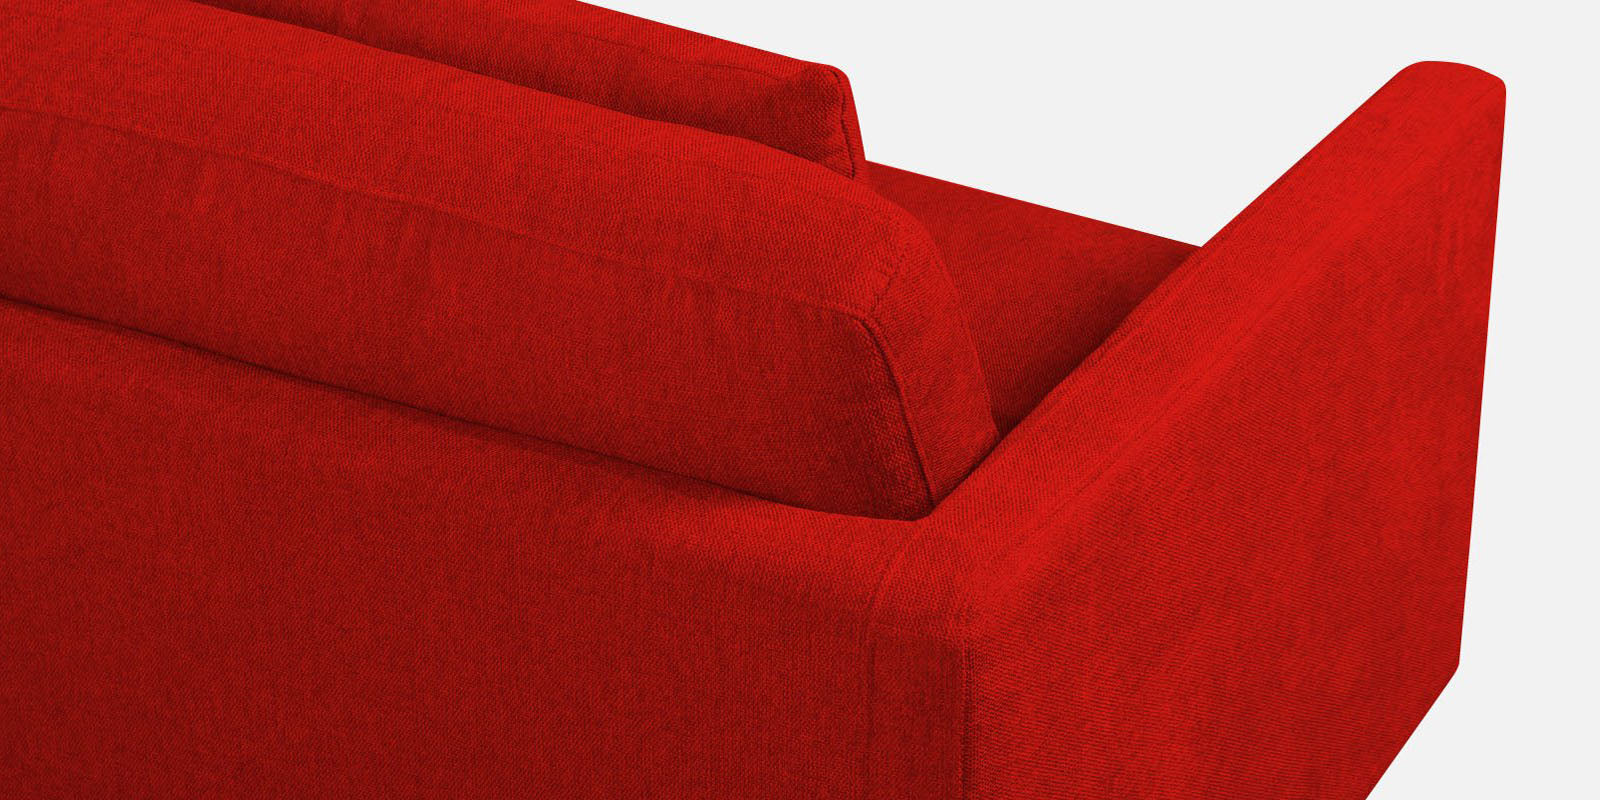 Kera Fabric 2 Seater Sofa in Ruby Red Colour